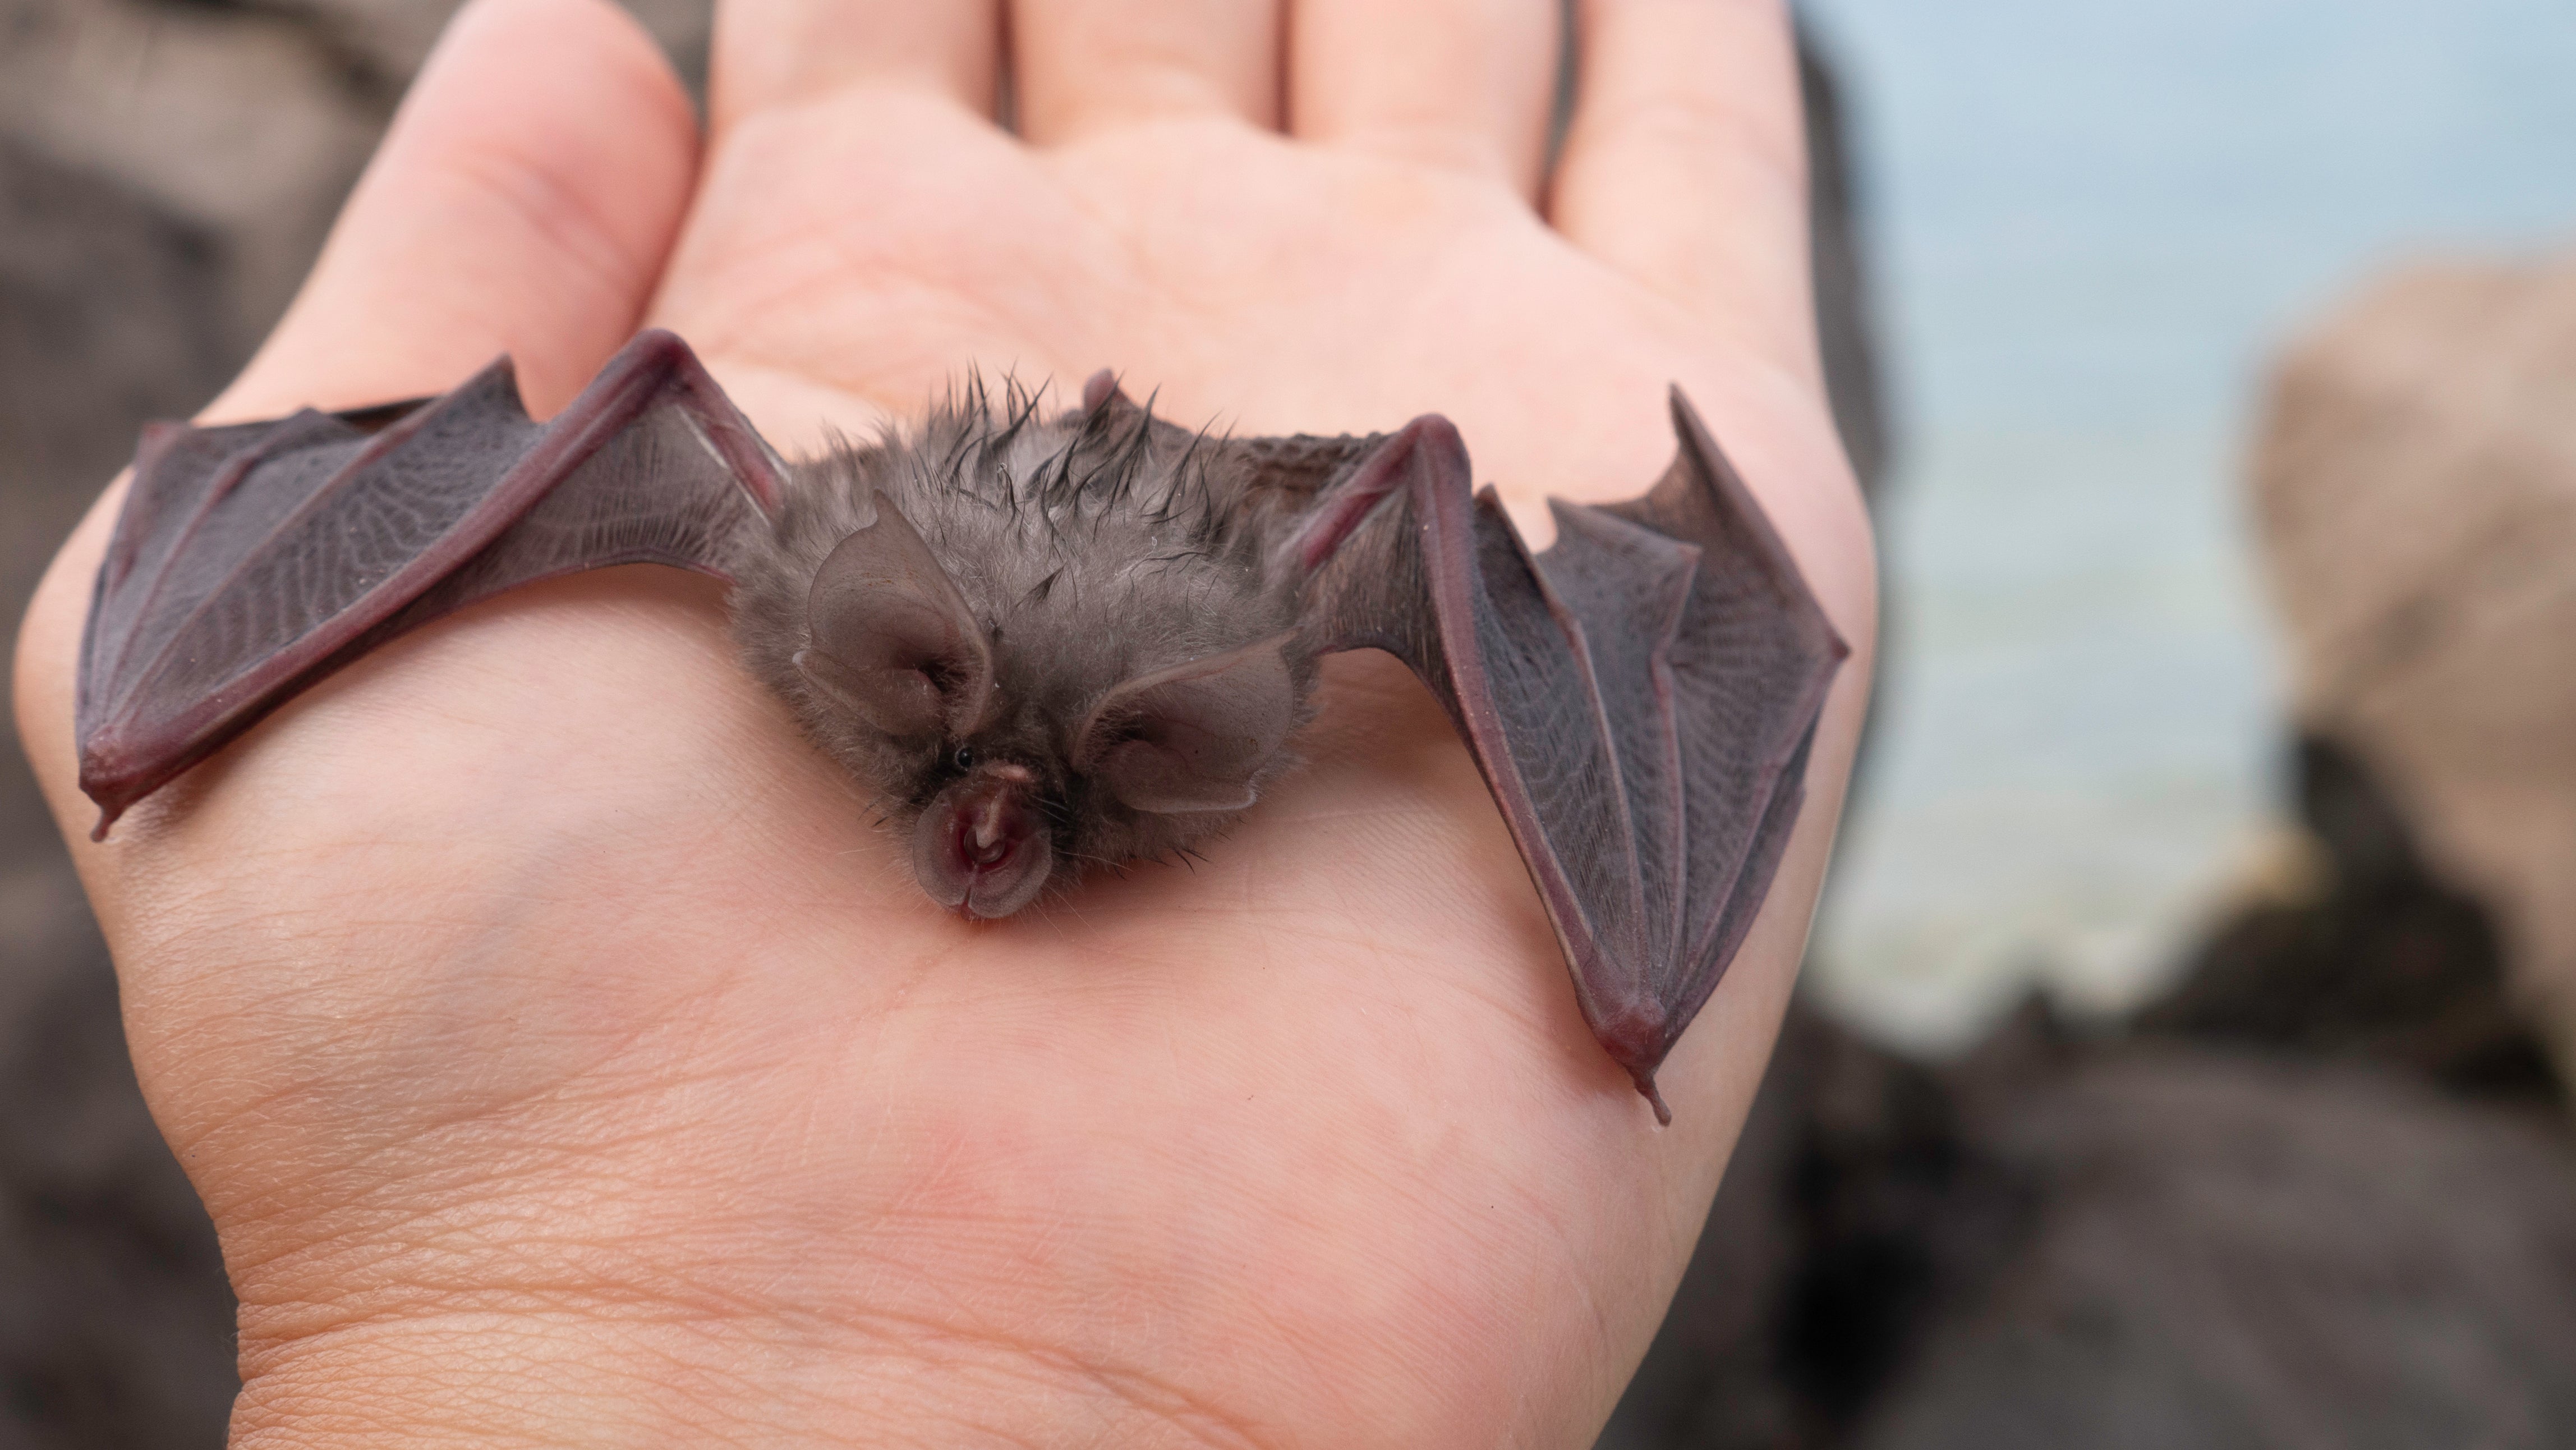 The young bats’ songs are not sung at the high frequencies their elders use for echolocation